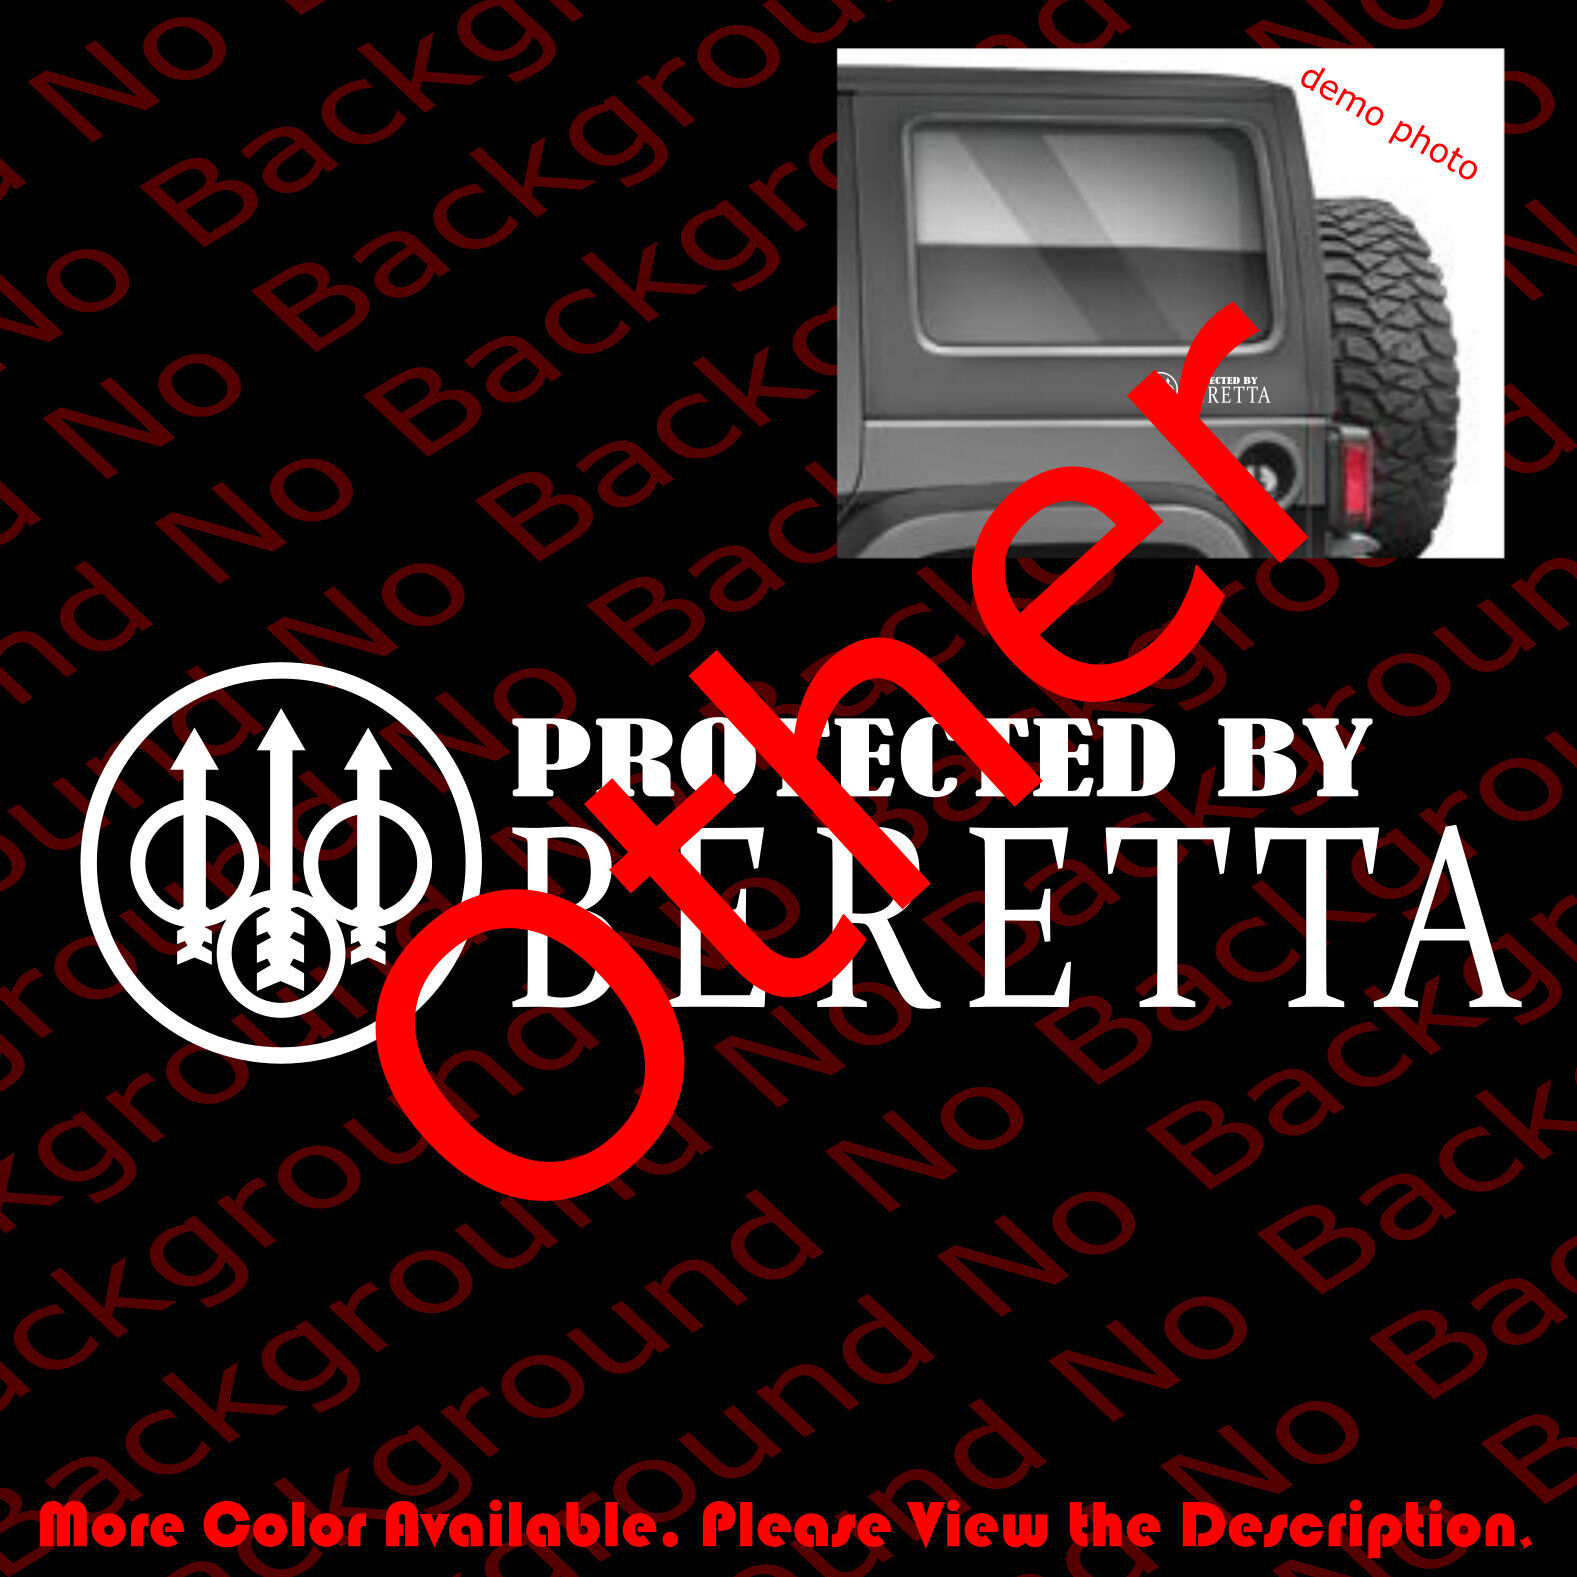 Protected by Beretta Firearms Vinyl Decal Die Cut Sticker for 2A Gun Rights FA31